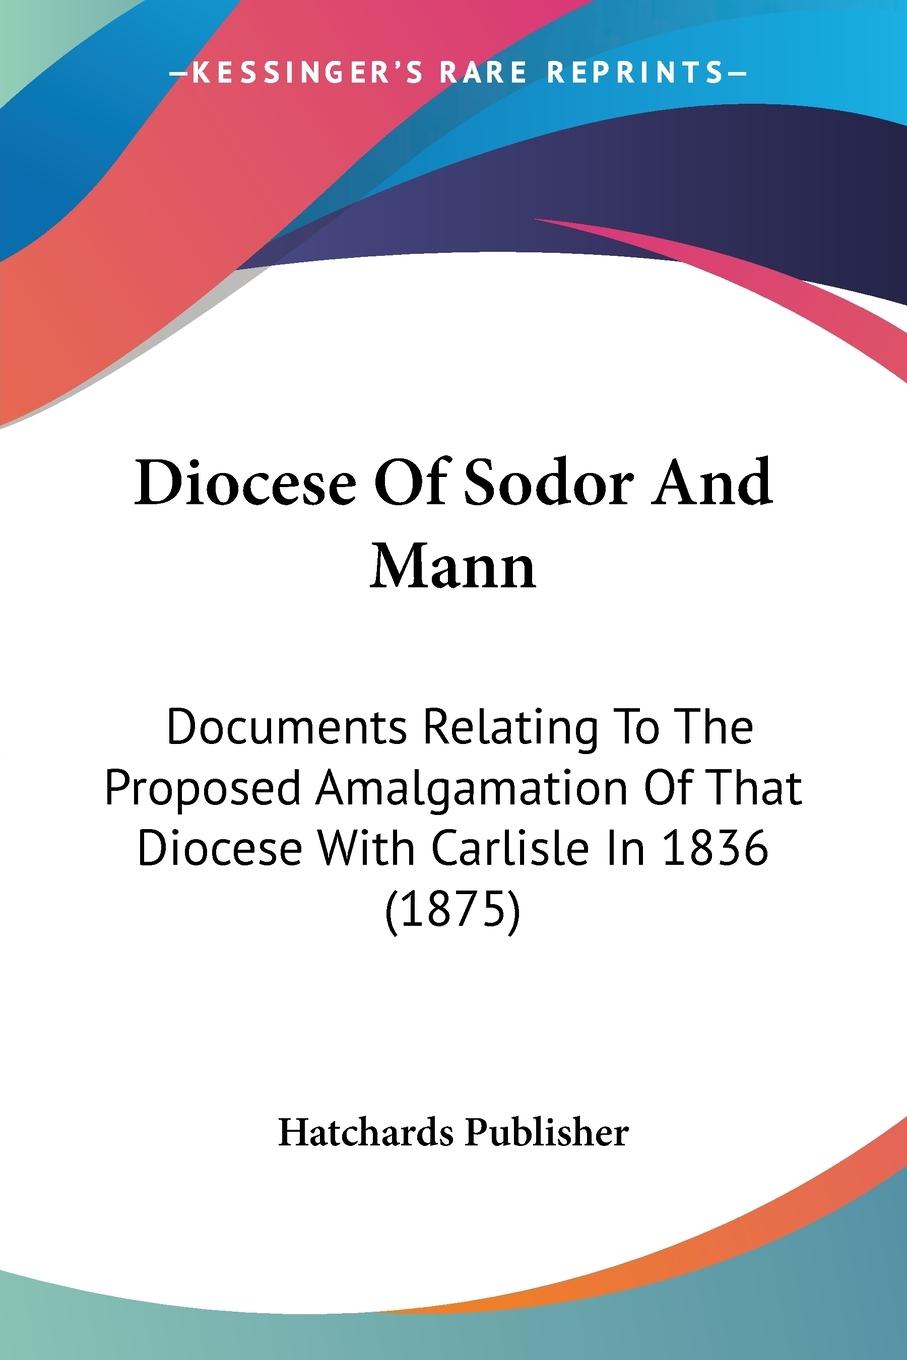 Diocese Of Sodor And Mann - Hatchards Publisher